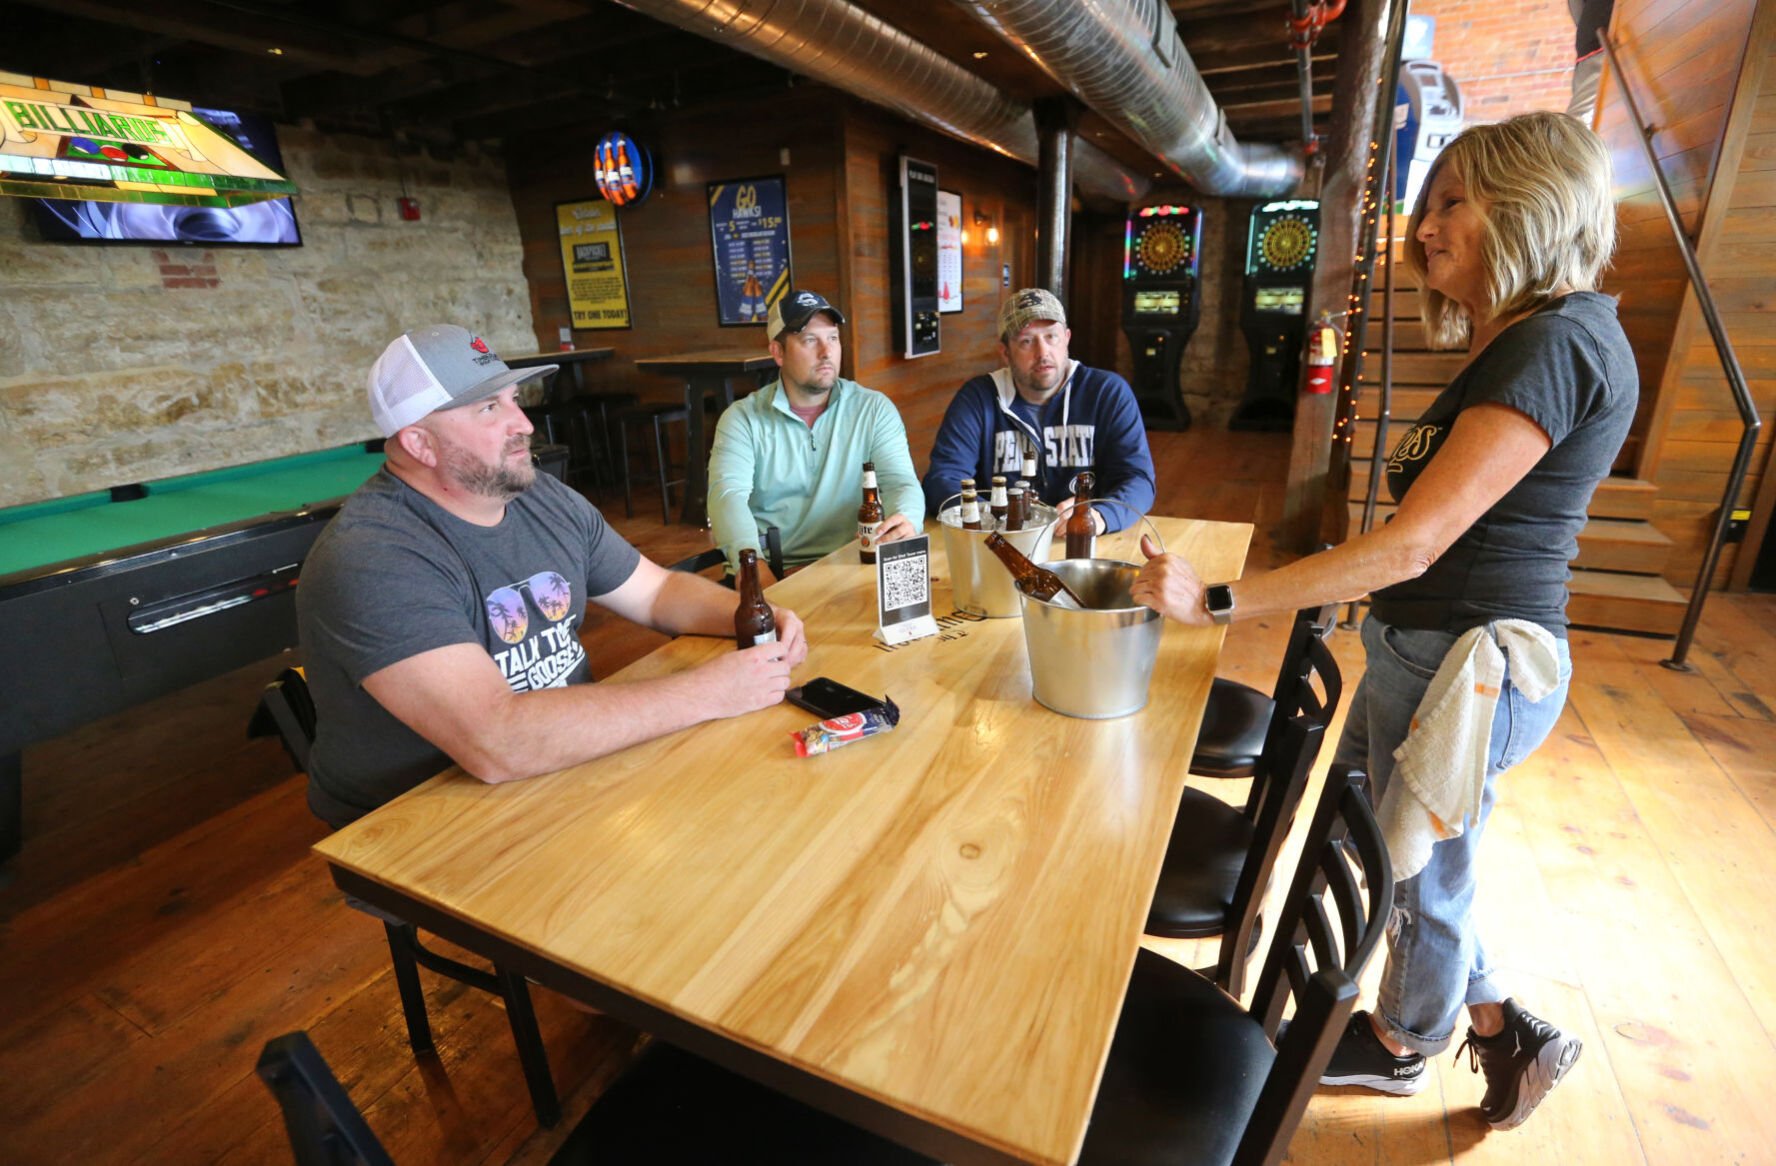 Co-owner Laurie Paulsen talks with Joe Goedken (from left), of Ottumwa, Iowa, and brothers Dan Loud and Kevin Loud, both of Fox Lake, Ill., at The Dungeon in Dubuque.    PHOTO CREDIT: JESSICA REILLY